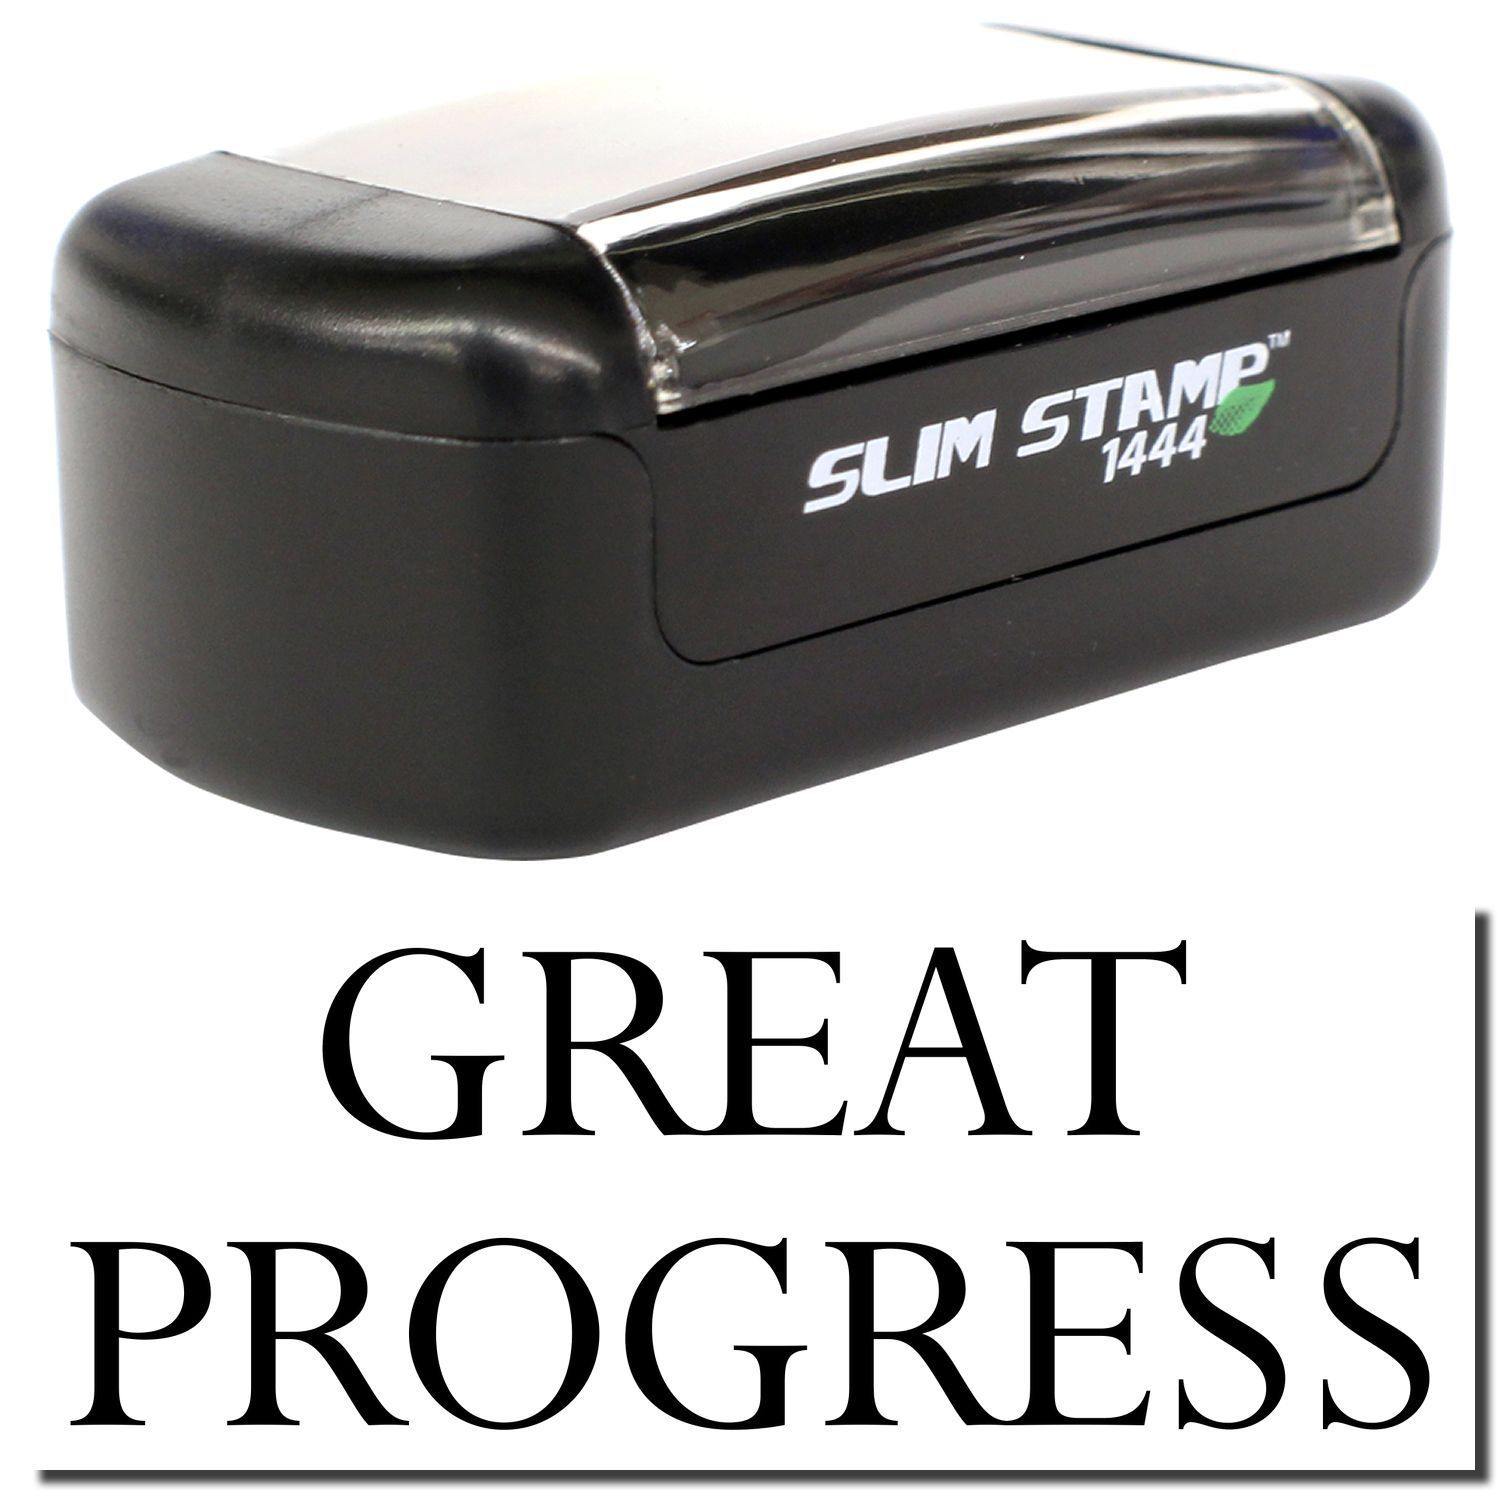 A stock office pre-inked stamp with a stamped image showing how the text "GREAT PROGRESS" is displayed after stamping.